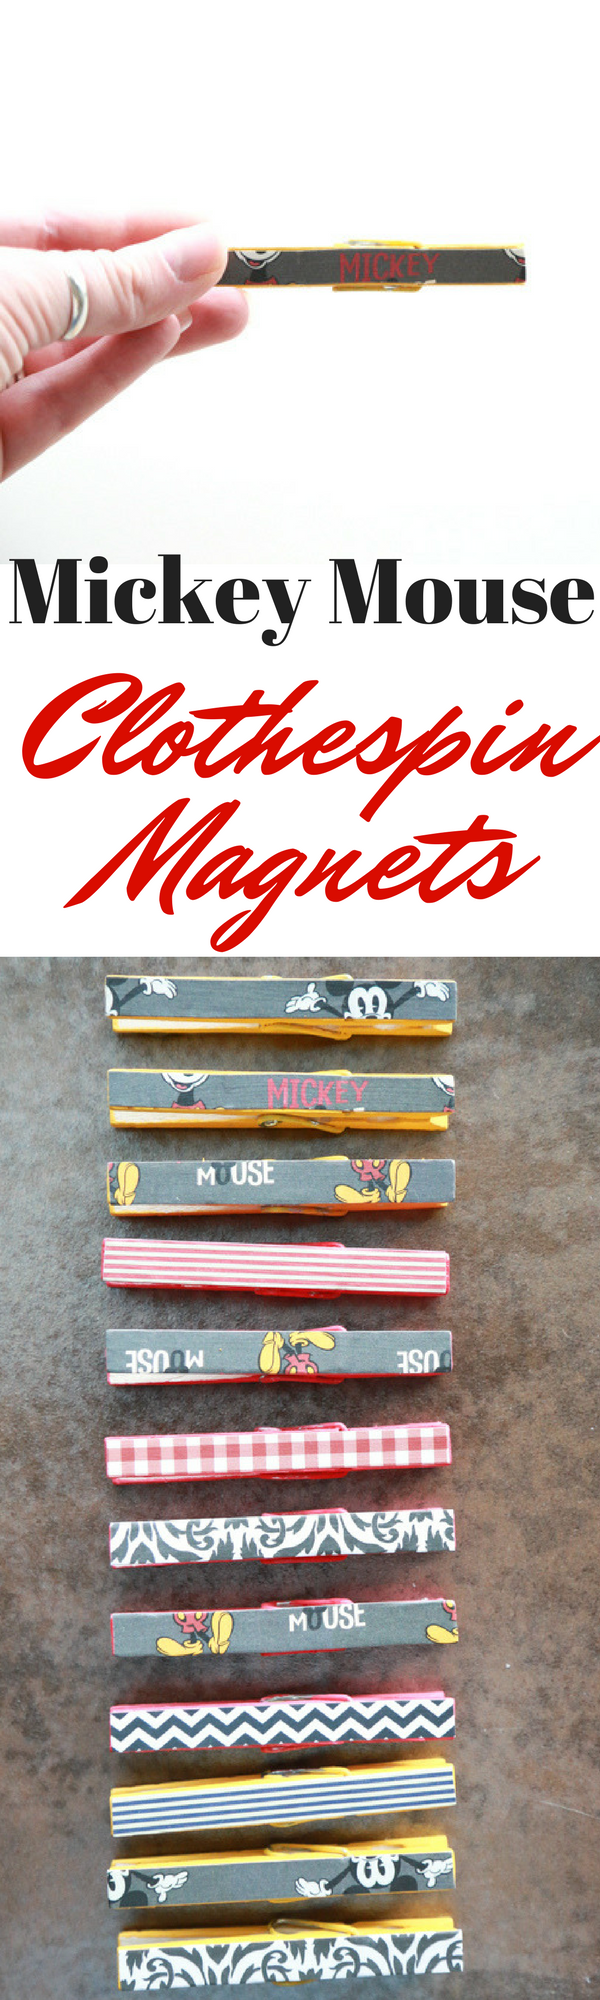 Need Fish Extender gift ideas? These Mickey Mouse Clothespin Magnets are the perfect, homemade gift!